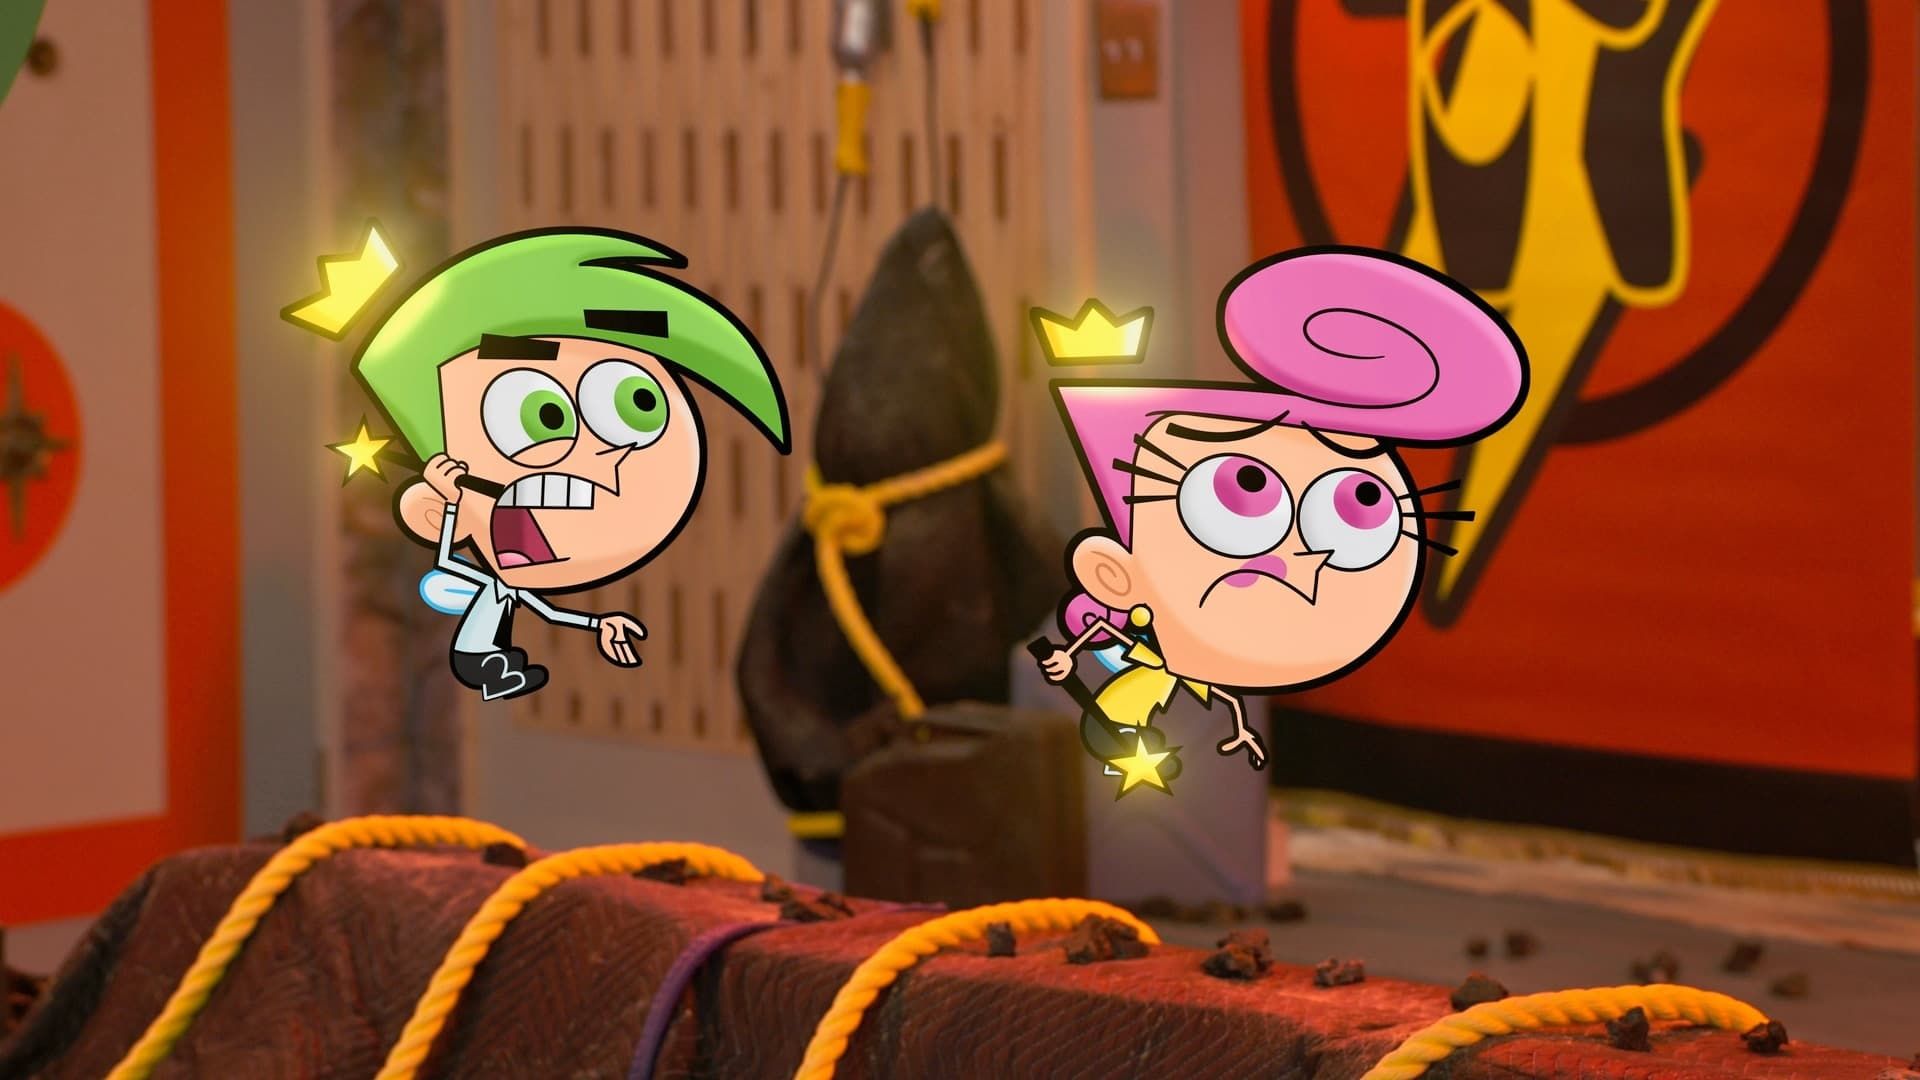 The Fairly OddParents: Fairly Odder background